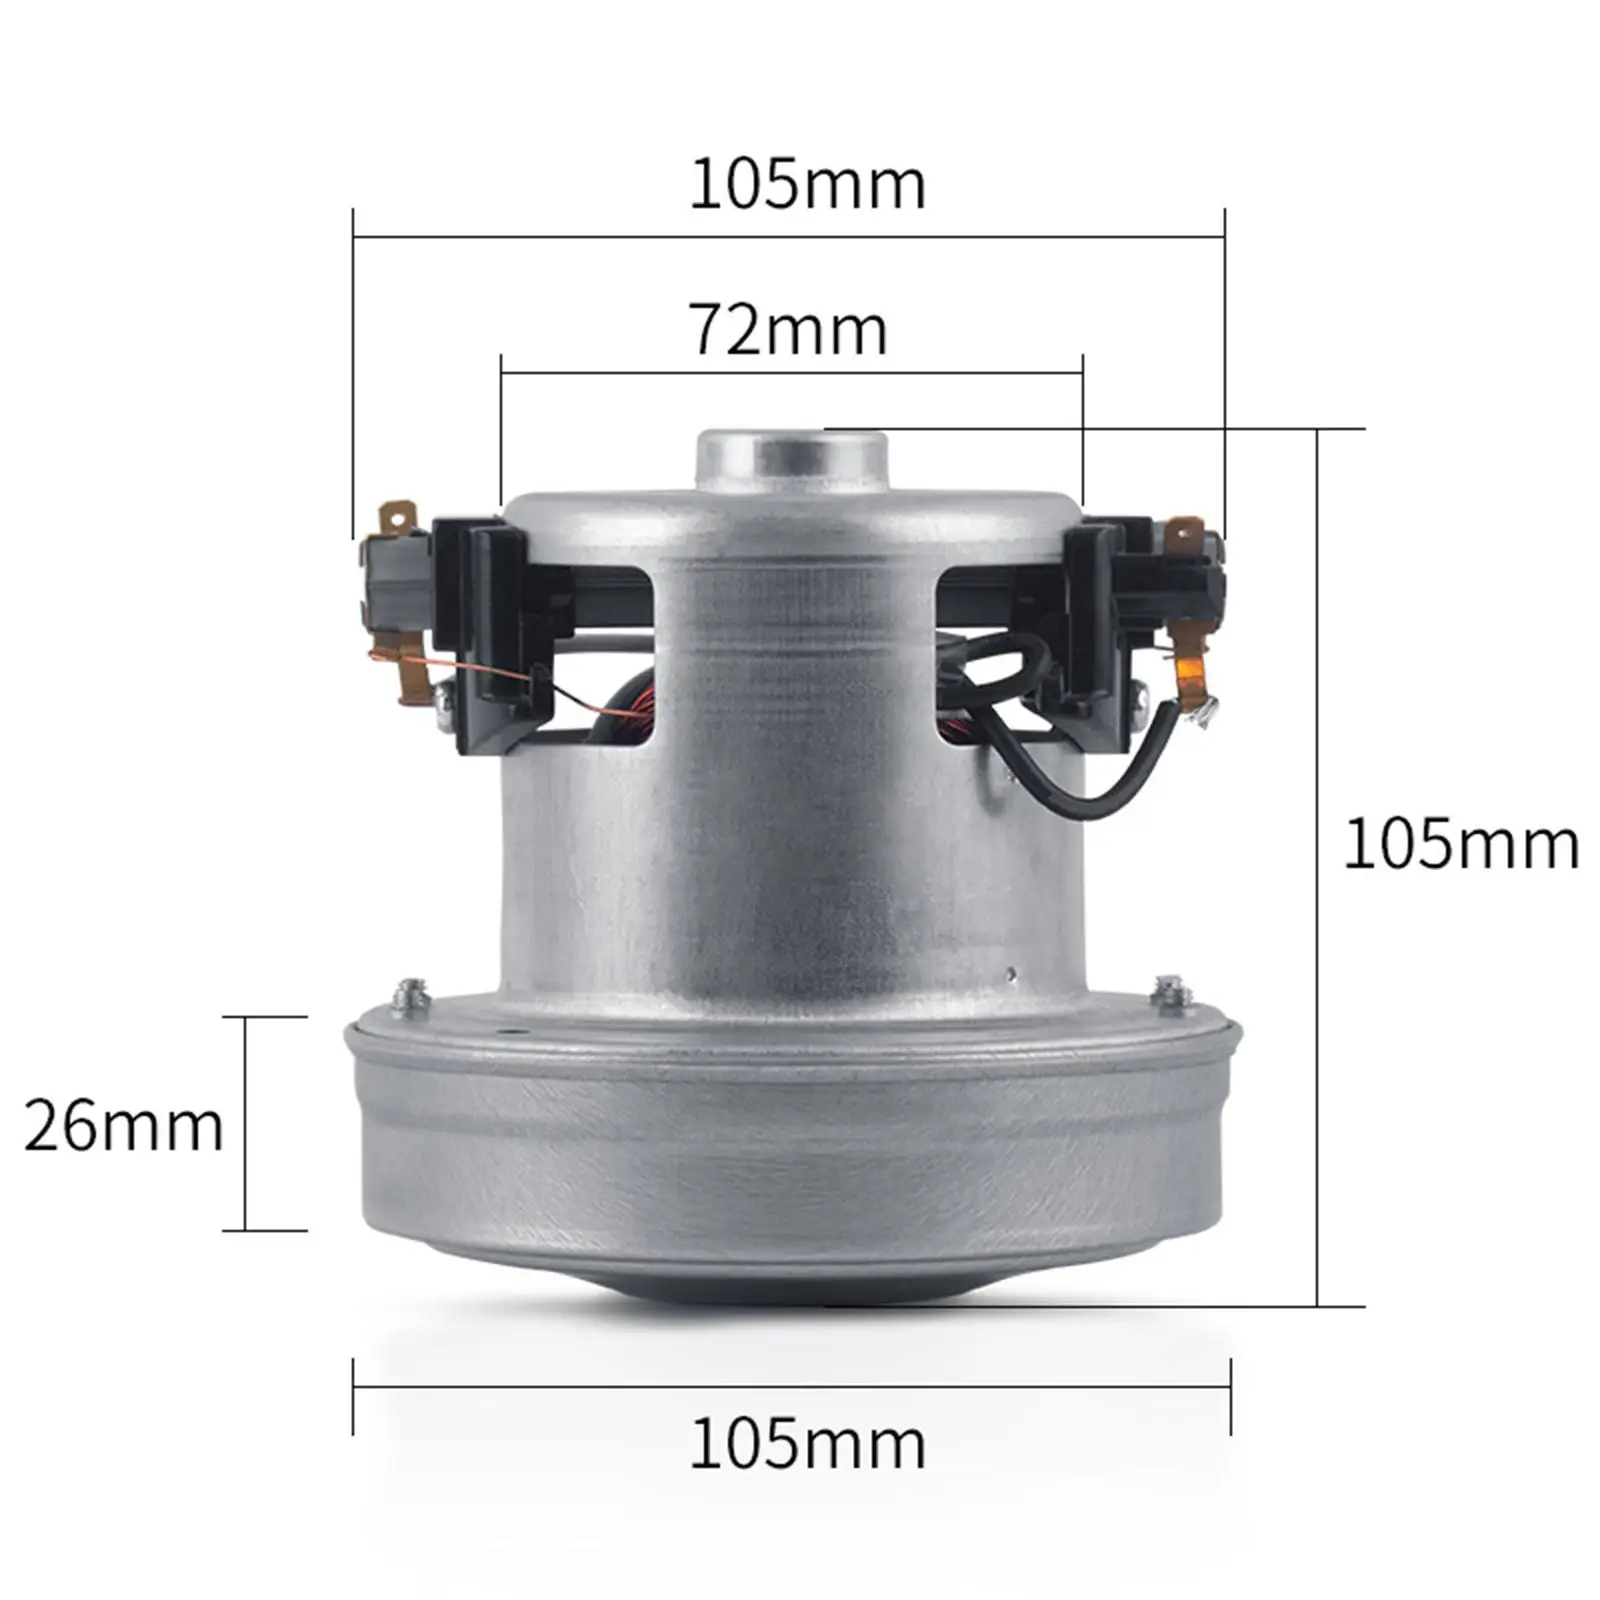 Universal Vacuum Cleaner Motor Wet and Dry 1200W 220V Parts for Qw12T-202 Qw12T-610 Qw12T-607 Vacuum Cleaners Accessory